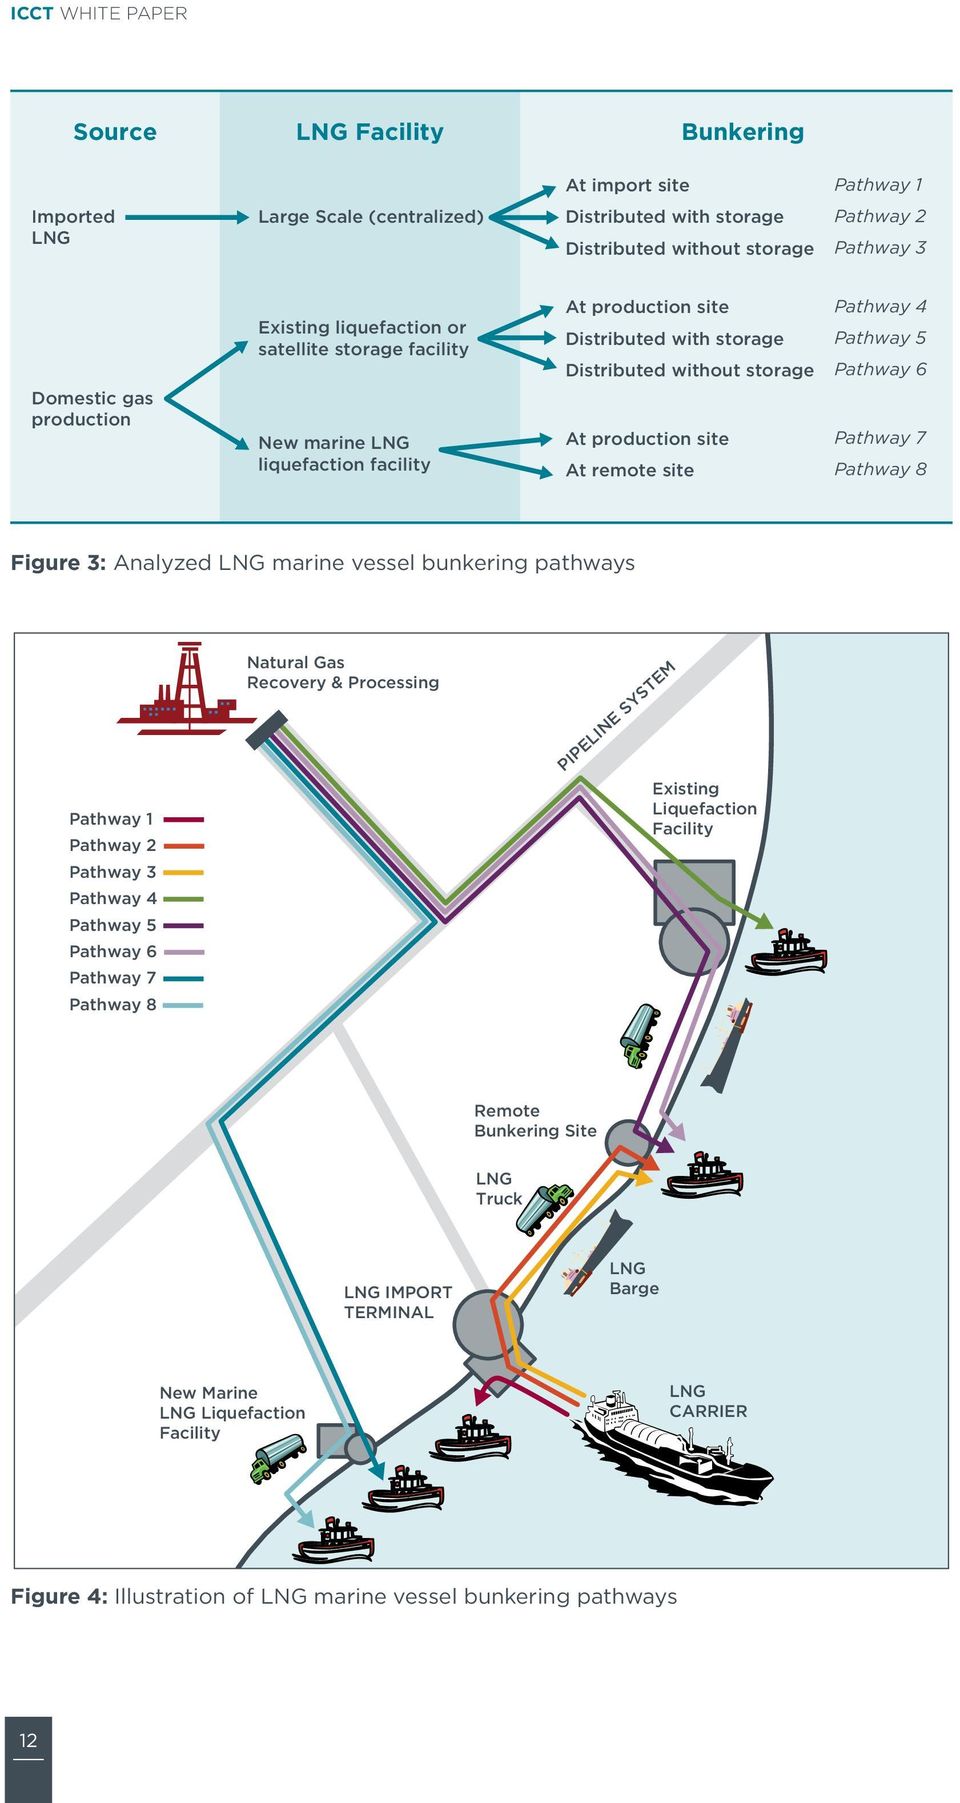 6 At production site Pathway 7 At remote site Pathway 8 Figure 3: Analyzed LNG marine vessel bunkering pathways Pathway 1 Pathway 2 Pathway 3 Pathway 4 Pathway 5 Pathway 6 Pathway 7 Pathway 8 Natural